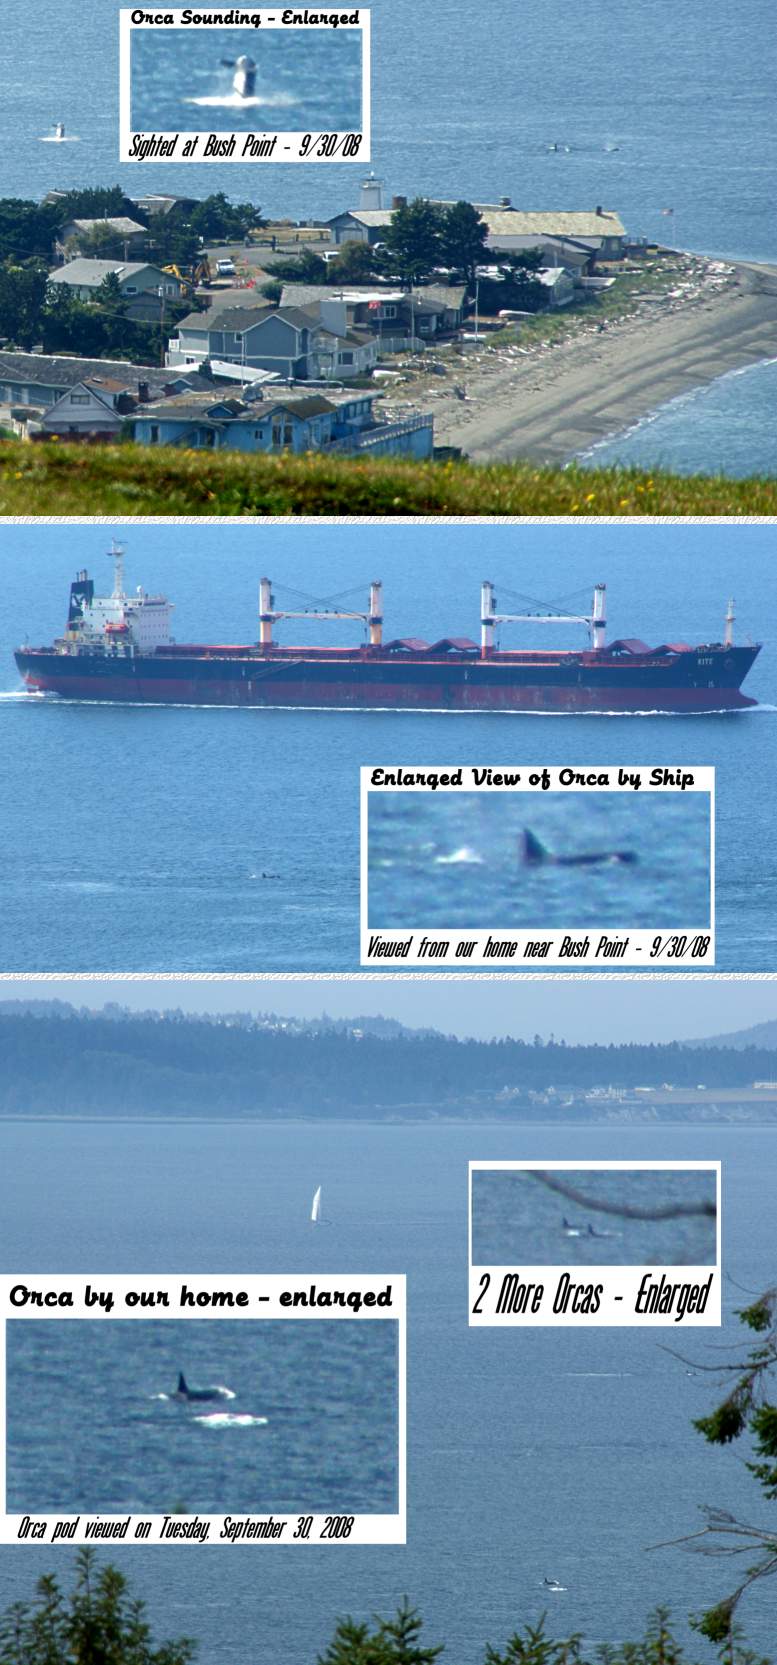 Killer whales as seen from our deck - 9/30/08
(Click the collage to enlarge it...)